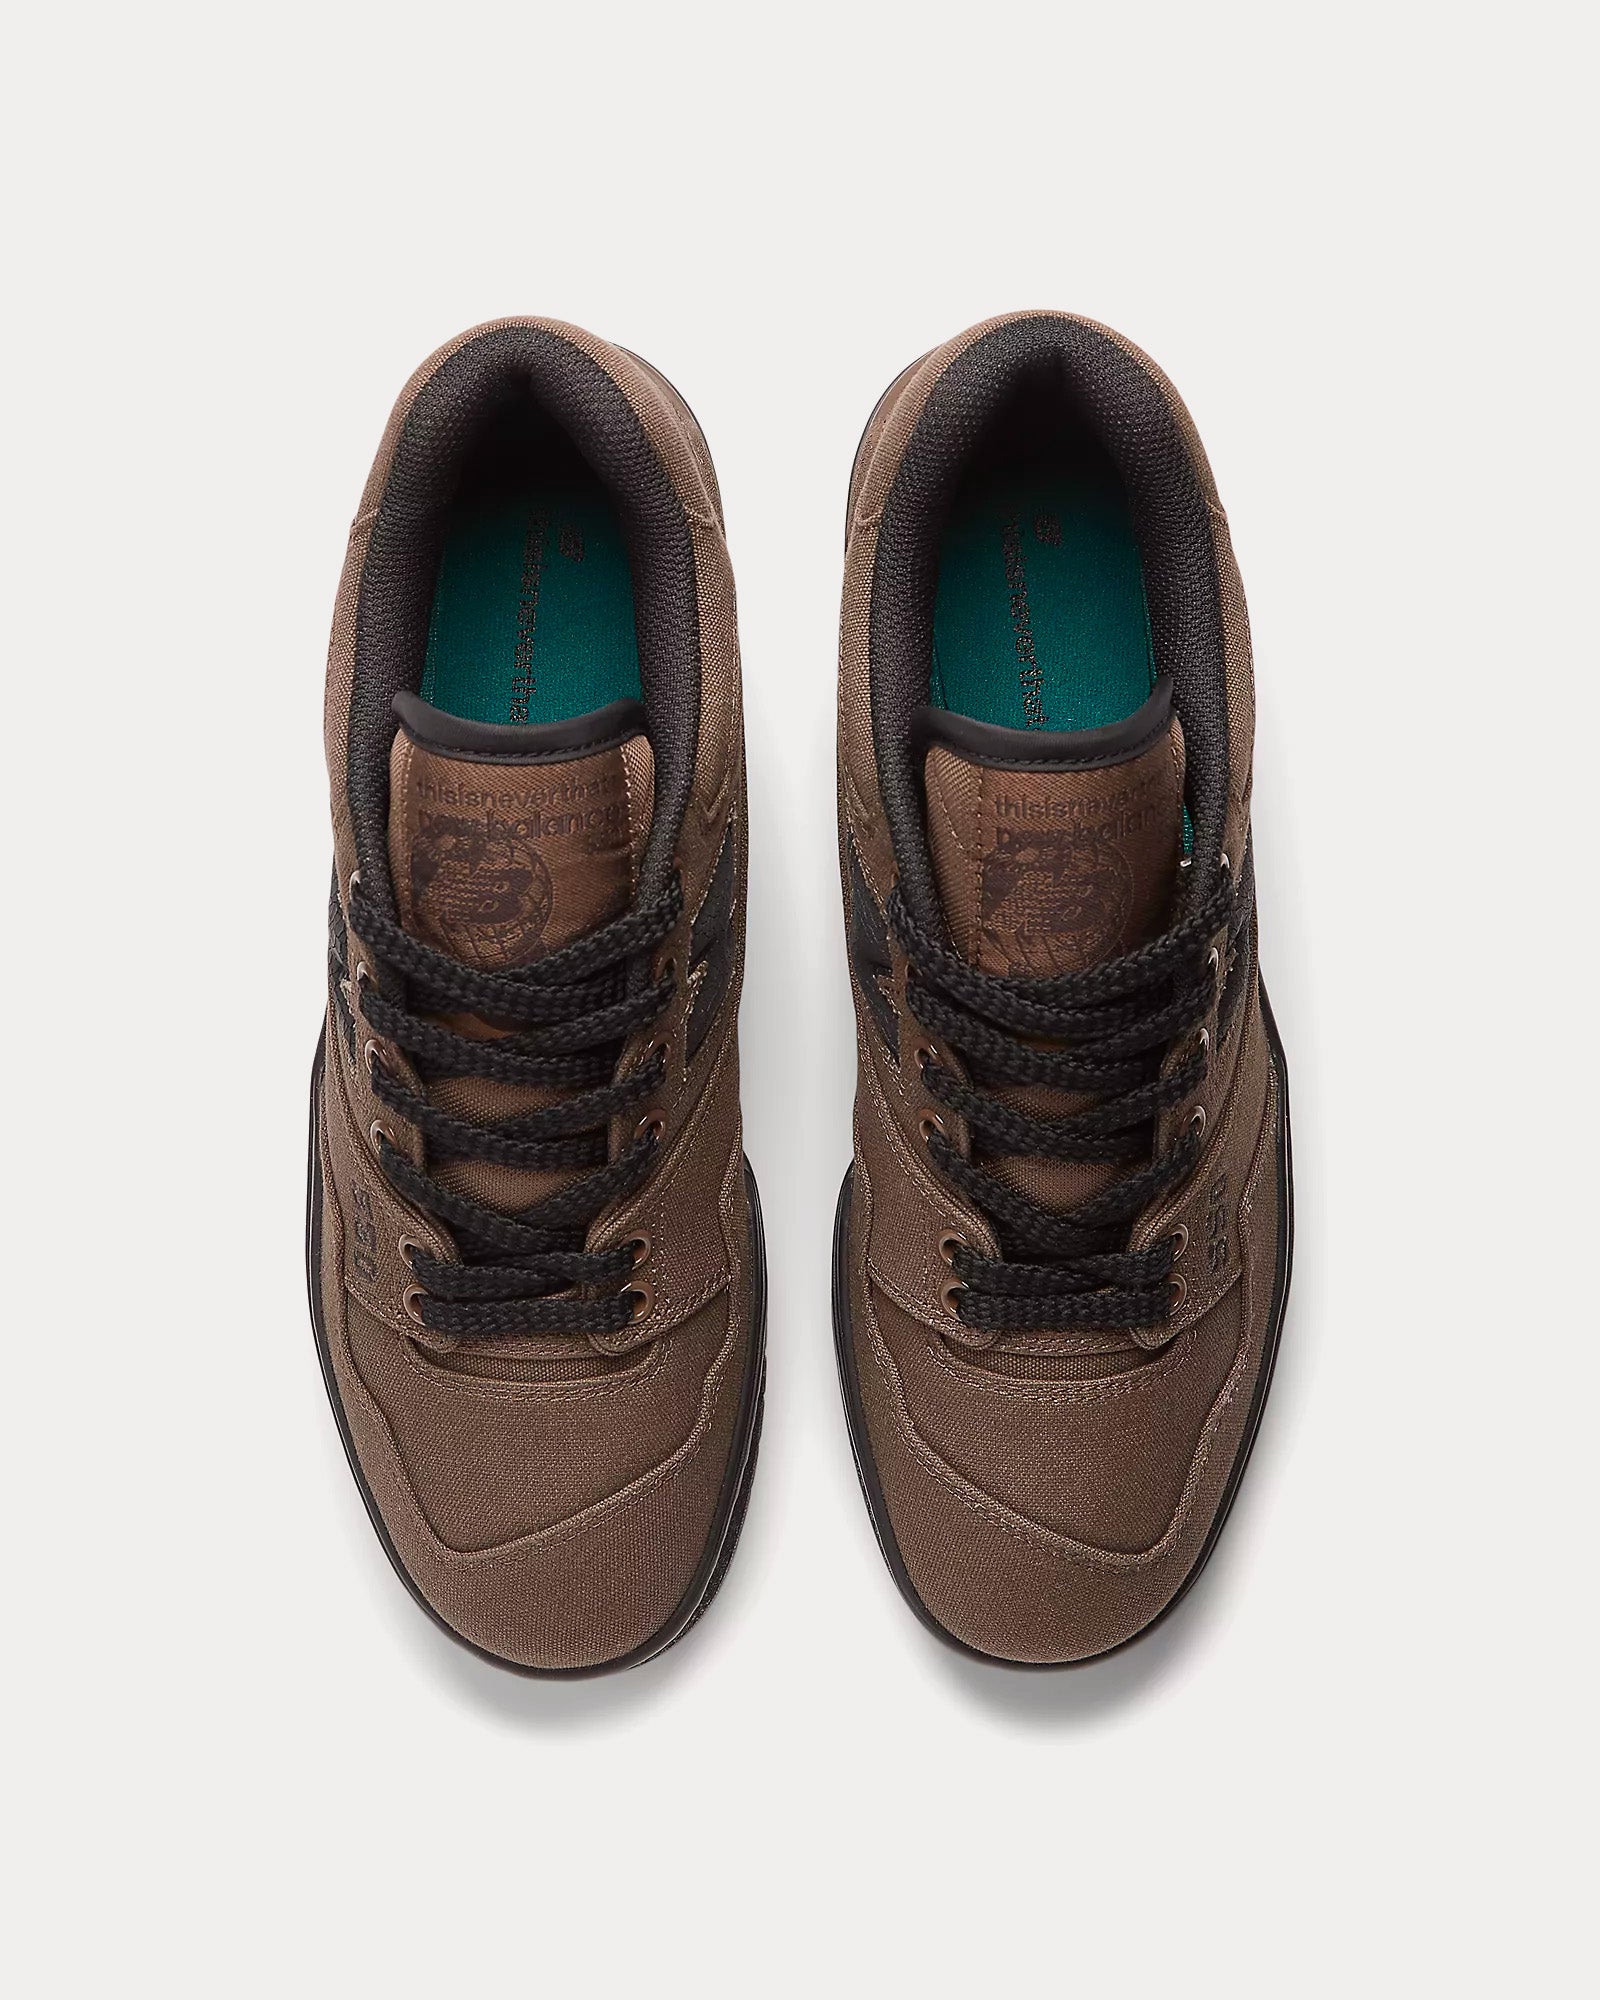 New Balance x thisisneverthat - BB550 Brown / Black Low Top Sneakers